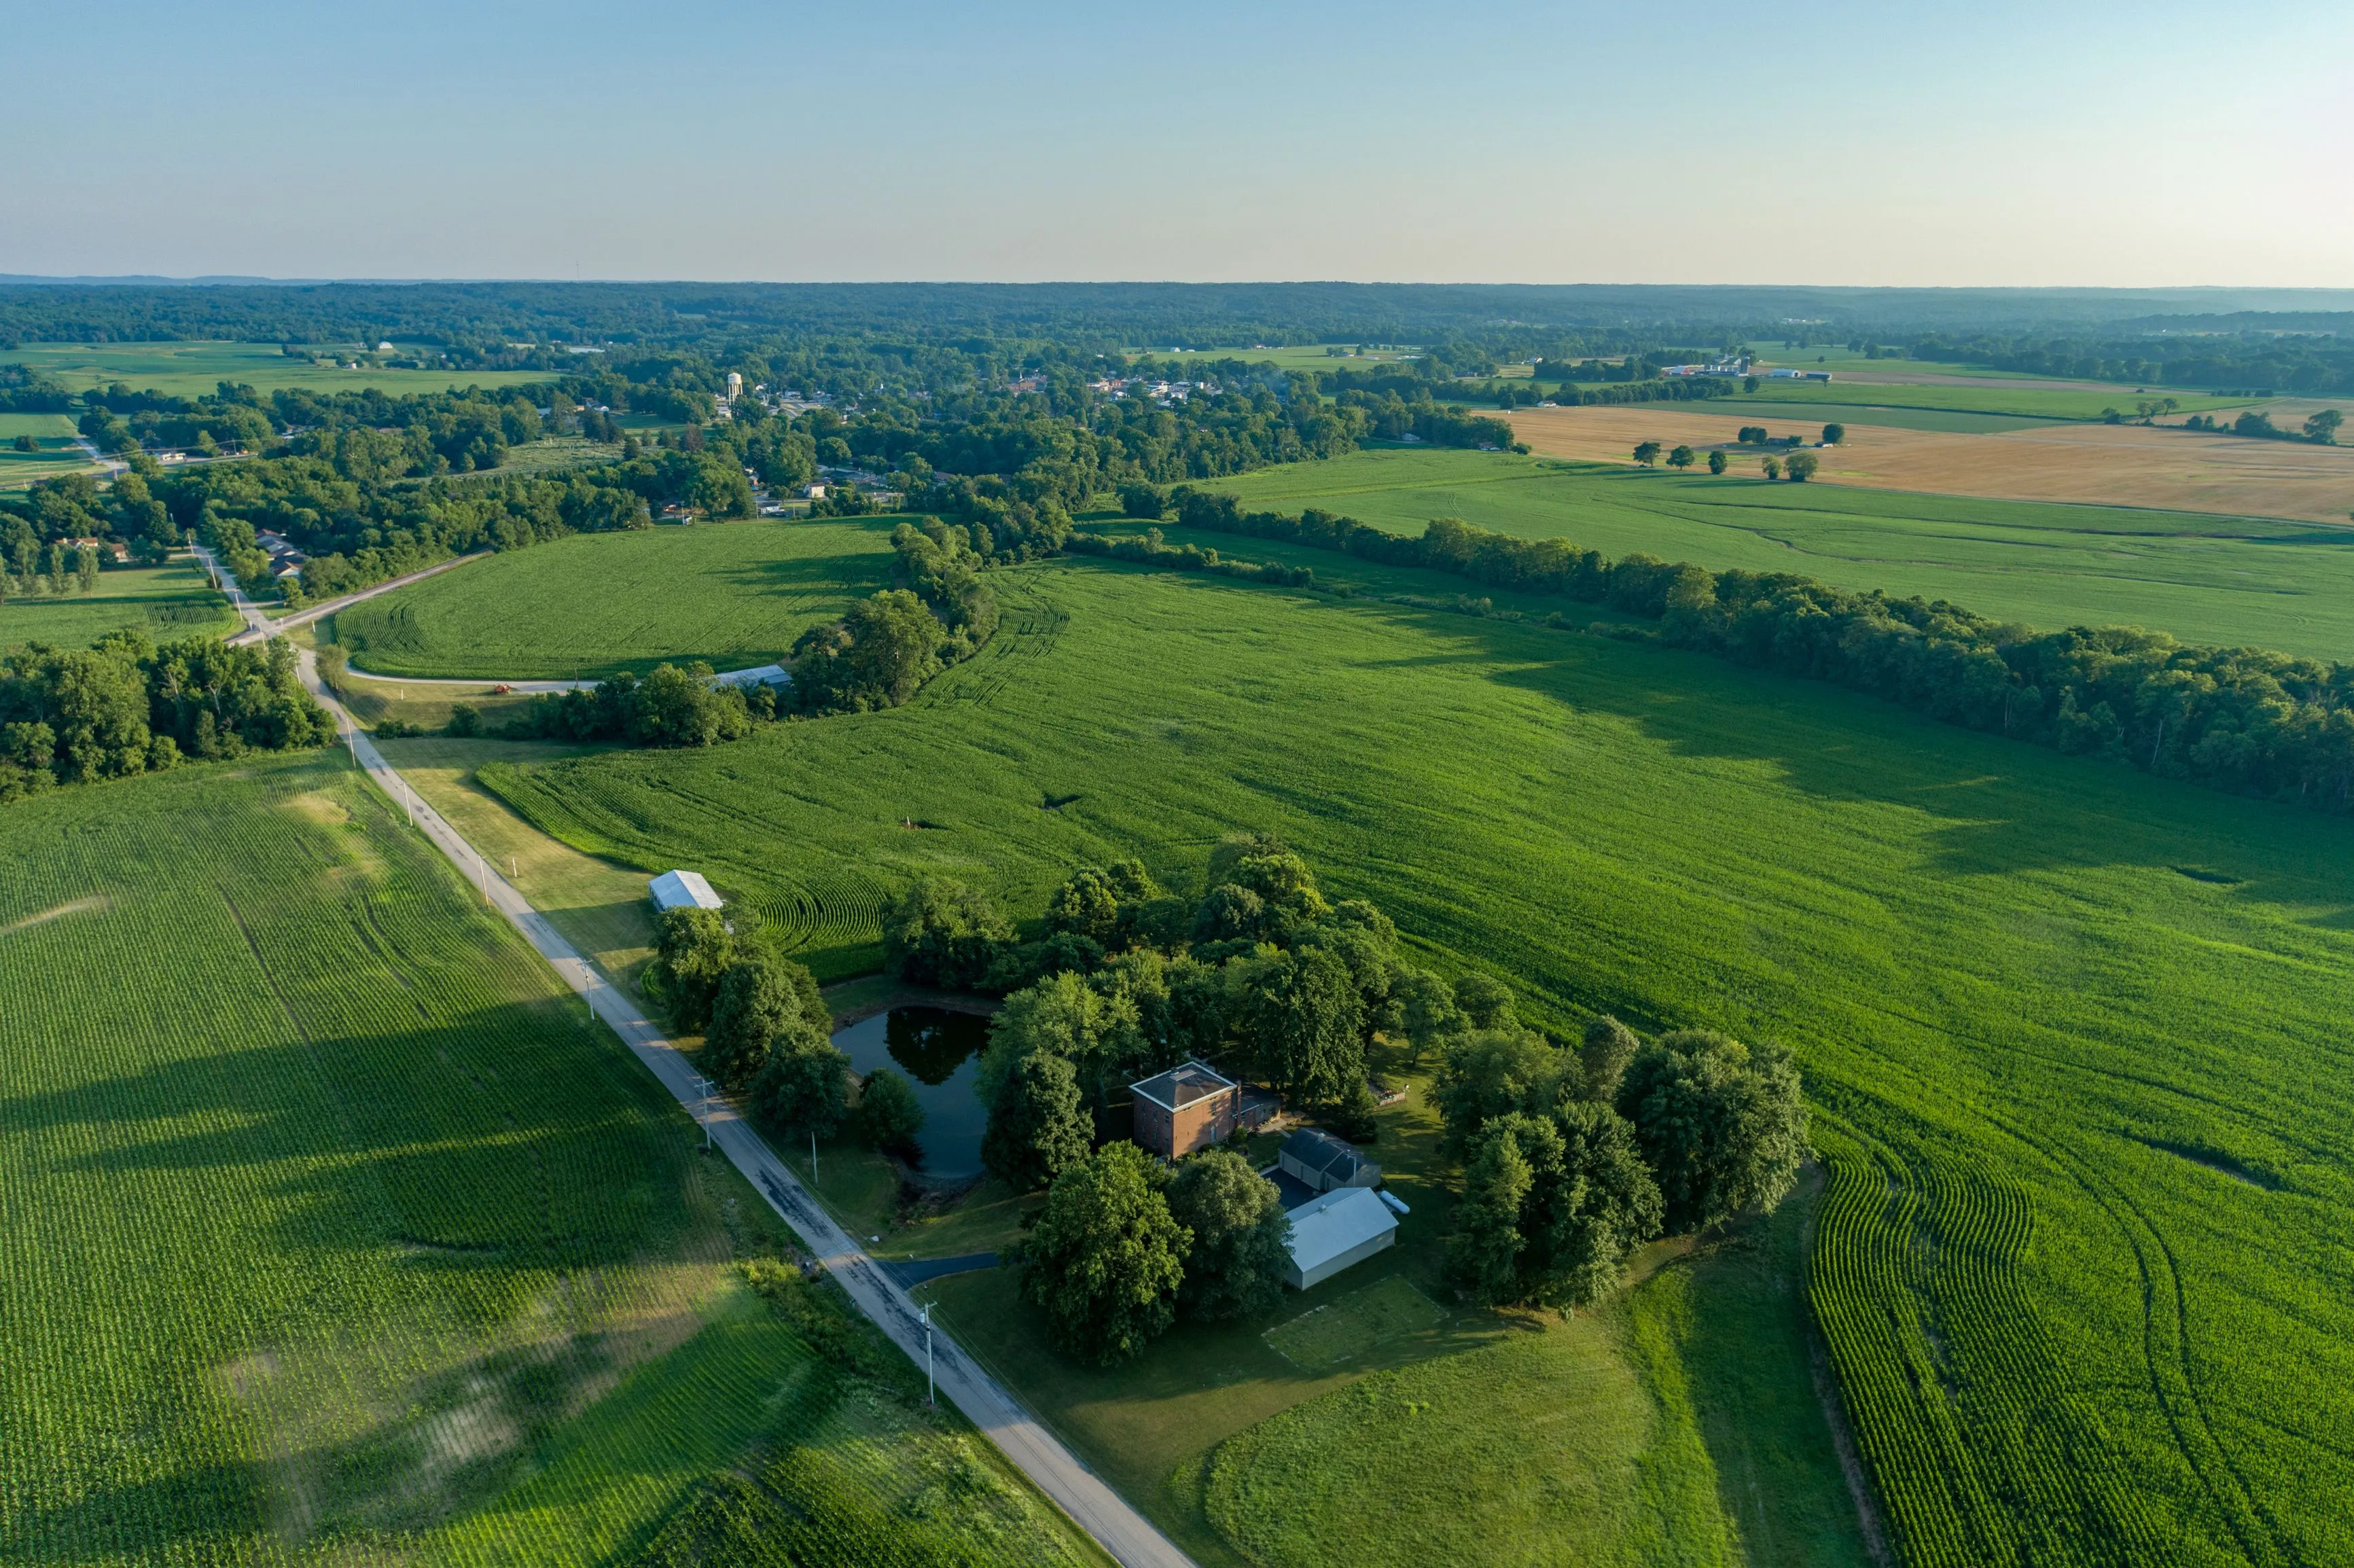 Aerial view of lush green farmland with crop fields, a pond, roads, and surrounding trees during early evening sunlight.